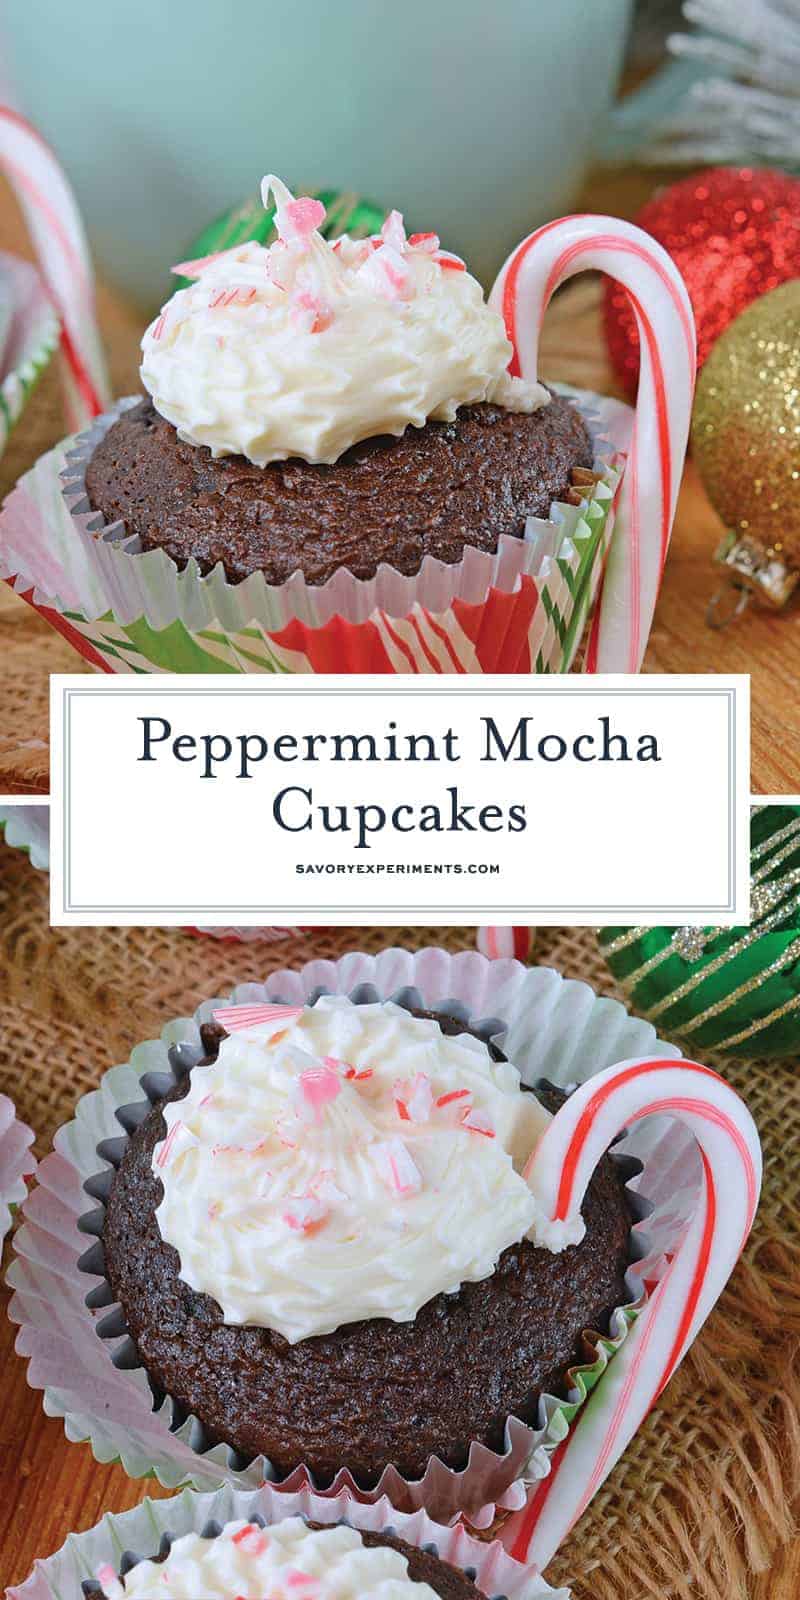 Peppermint Mocha Cupcakes use doctored up box mix, marshmallow creme frosting and candy canes for the ultimate kid-friendly cupcake recipe! #mochacupcakes #christmascupcakes www.savoryexperiments.com